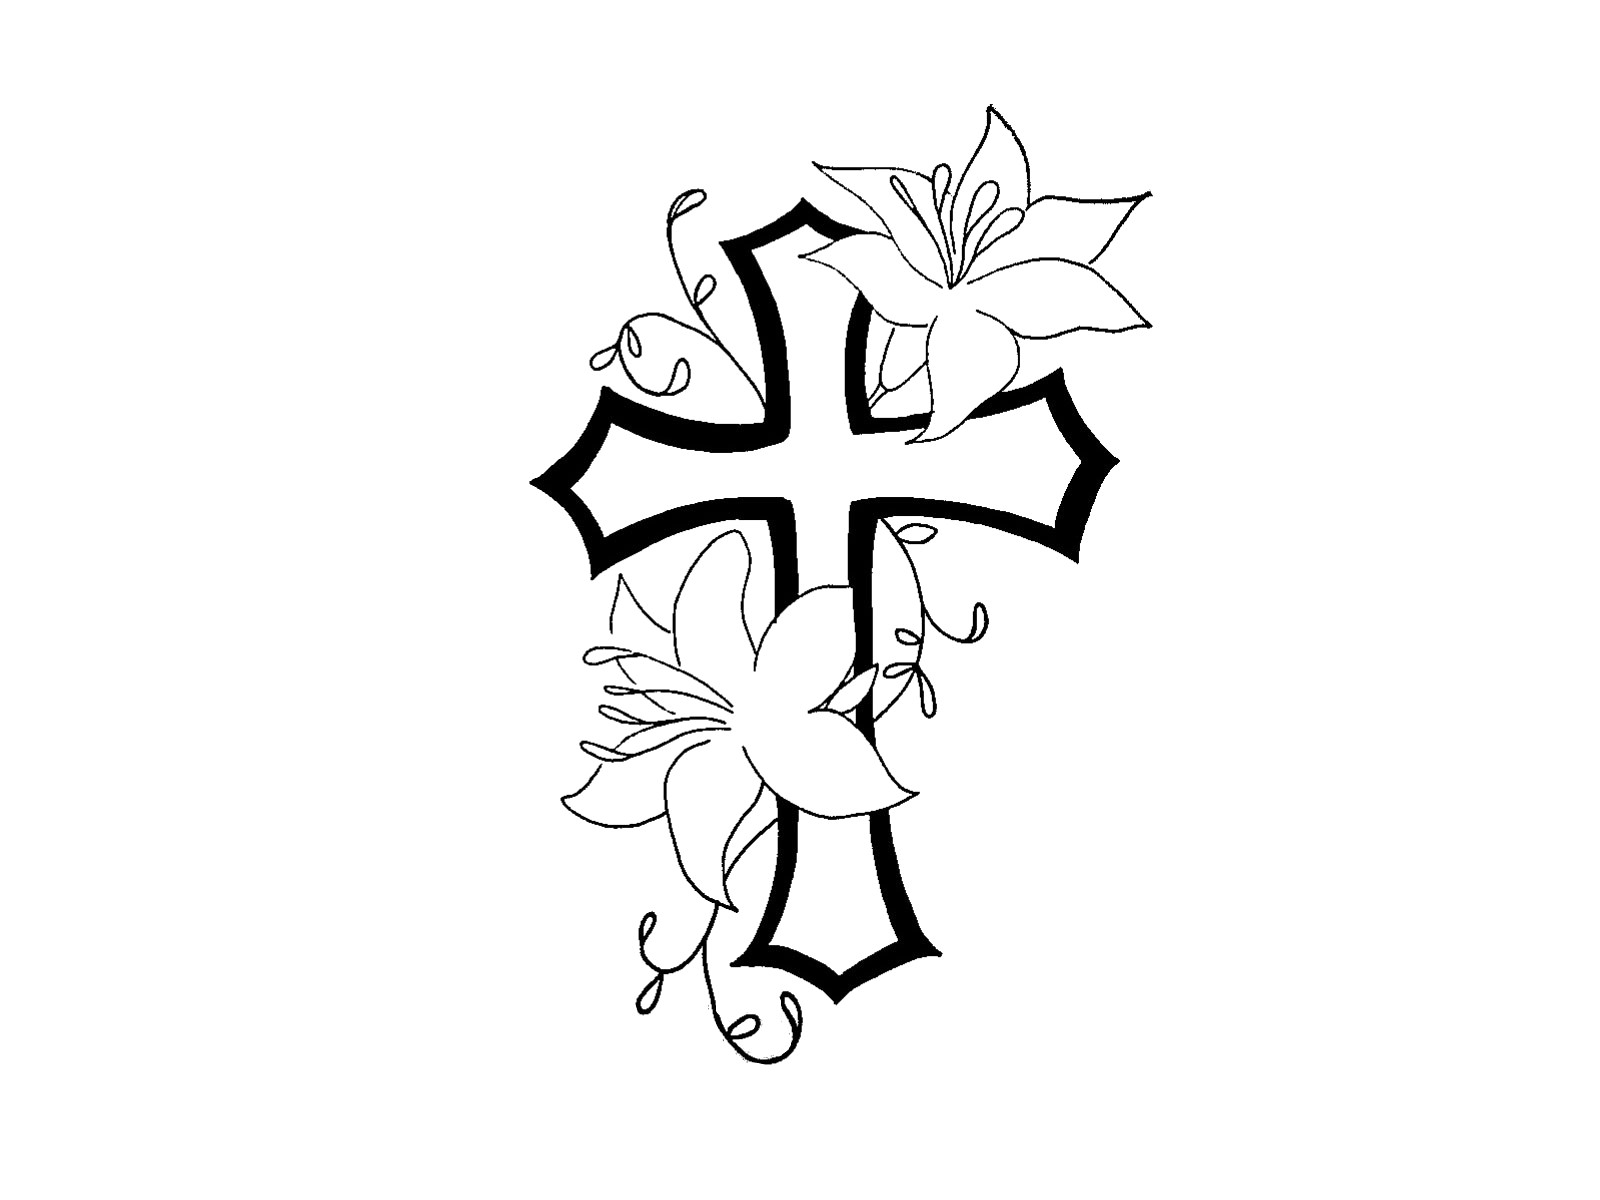 Select a cross tattoo design that complements your personal style along wit...